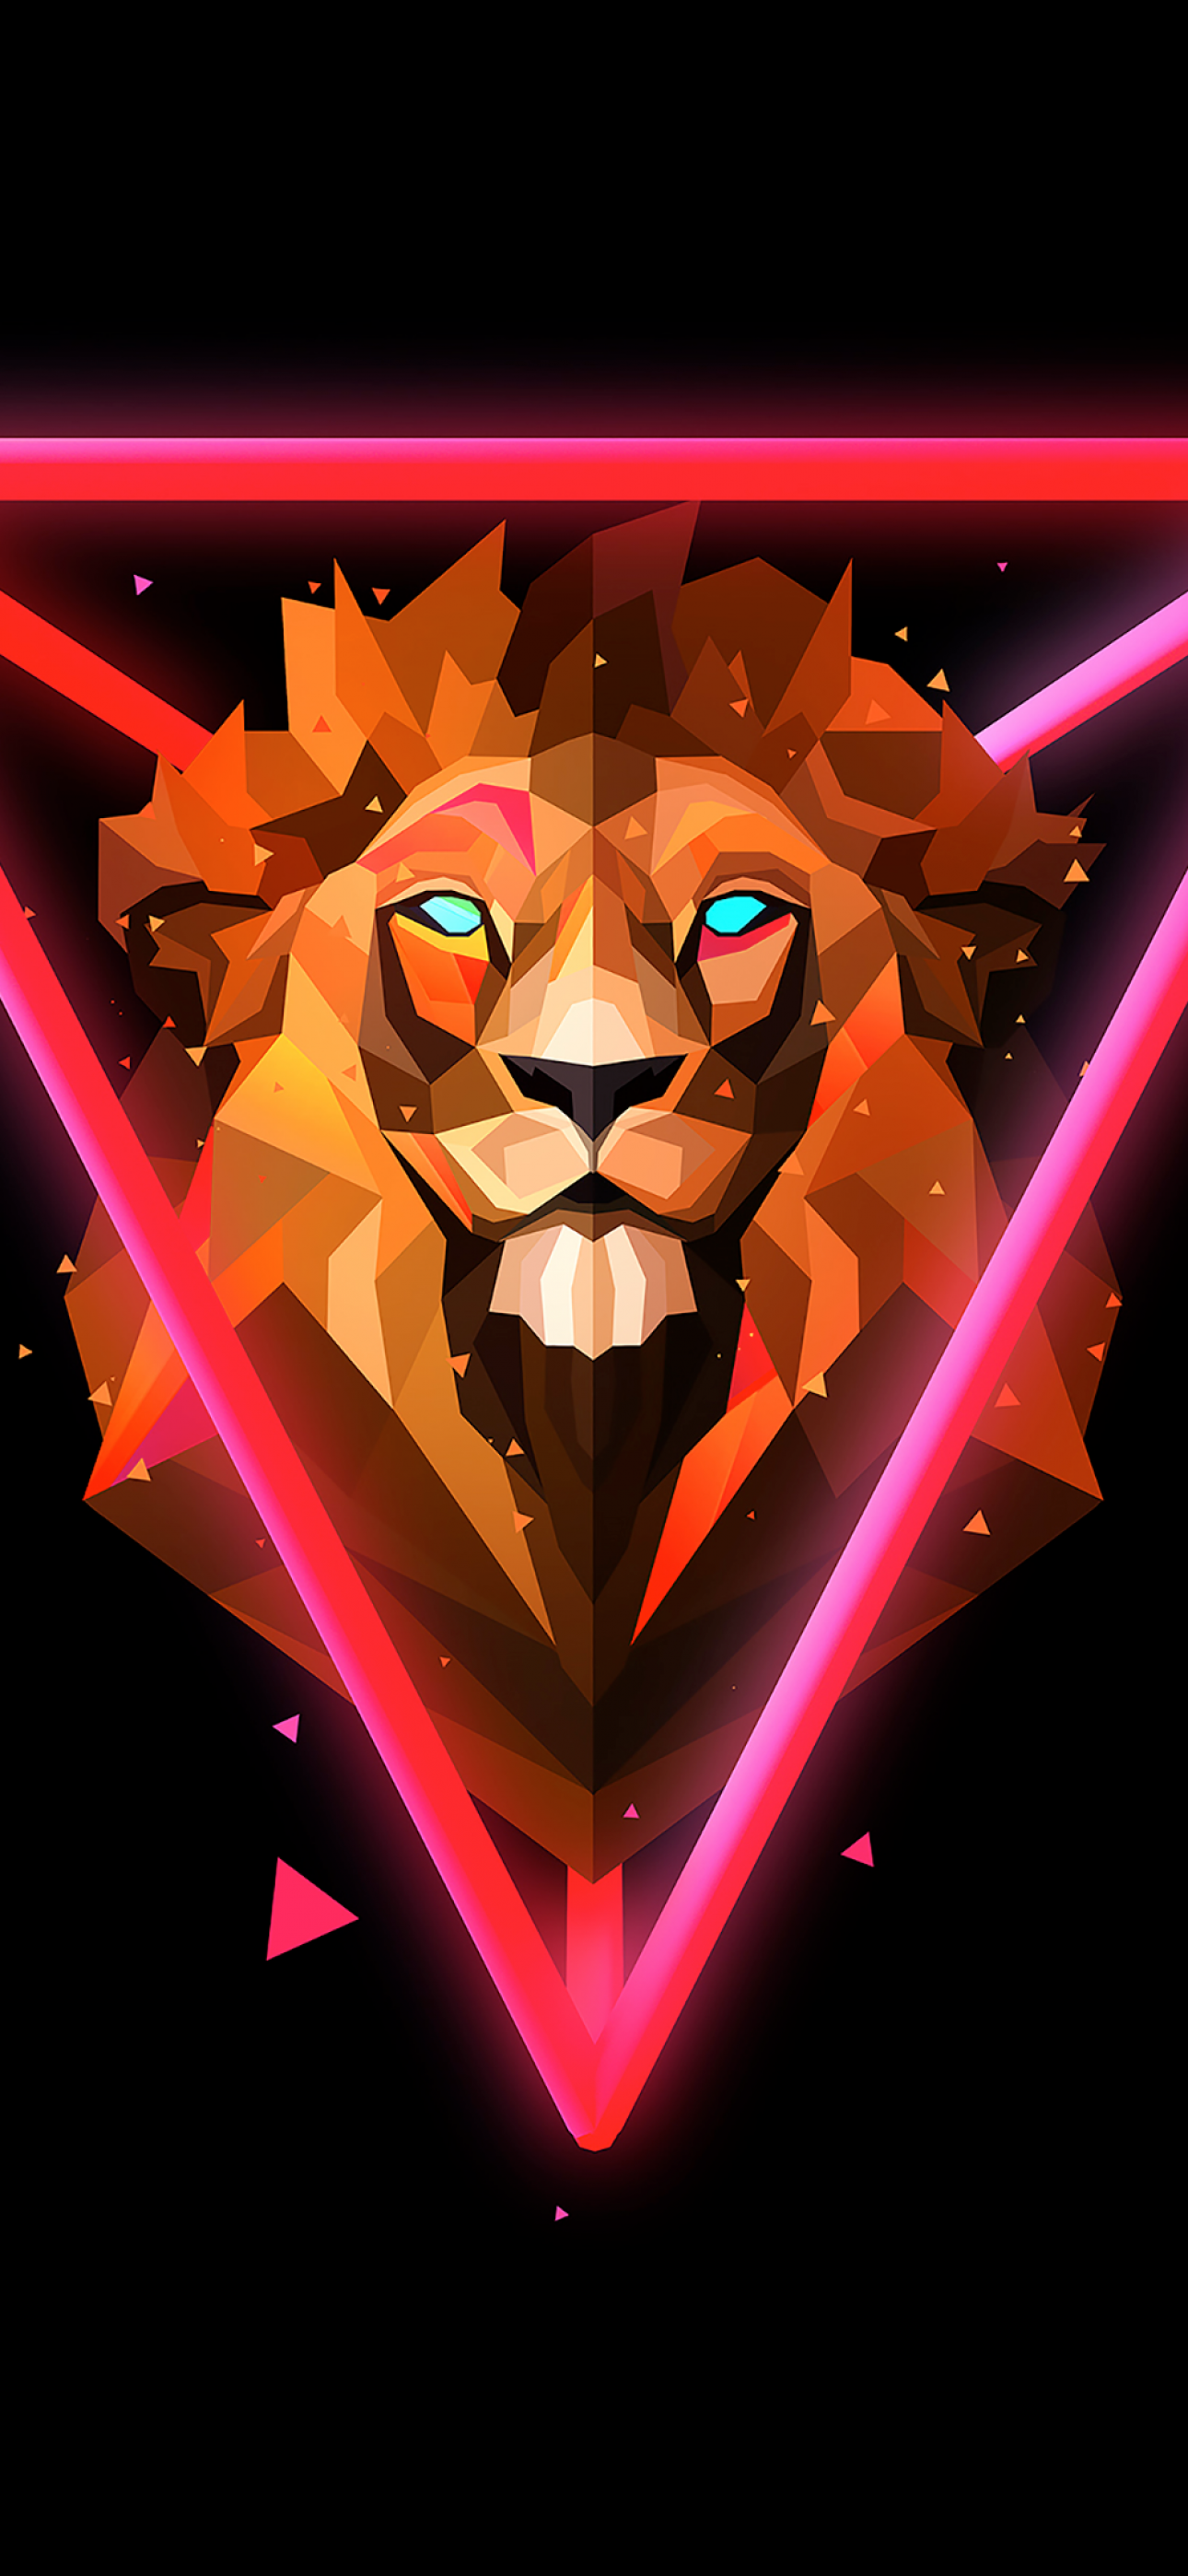 Wallpaper Lion Android Fantasy Color Call Hair Head Background   Download Free Image